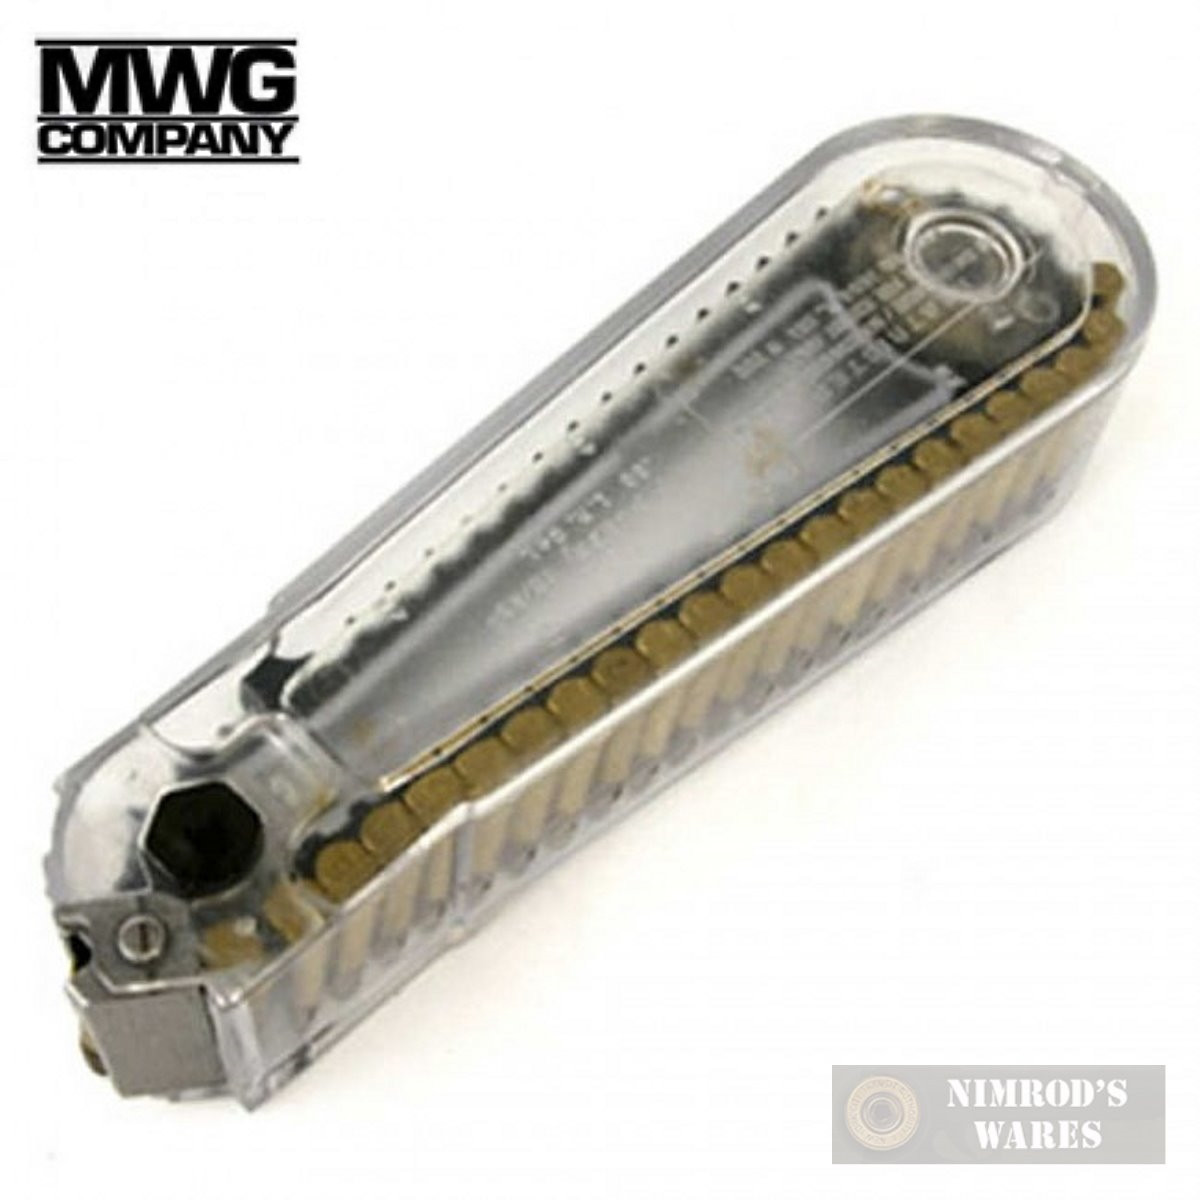 MWG FIFTY (50) Round Magazine for RUGER 10/22 .22 LR MWG-022-050 ...